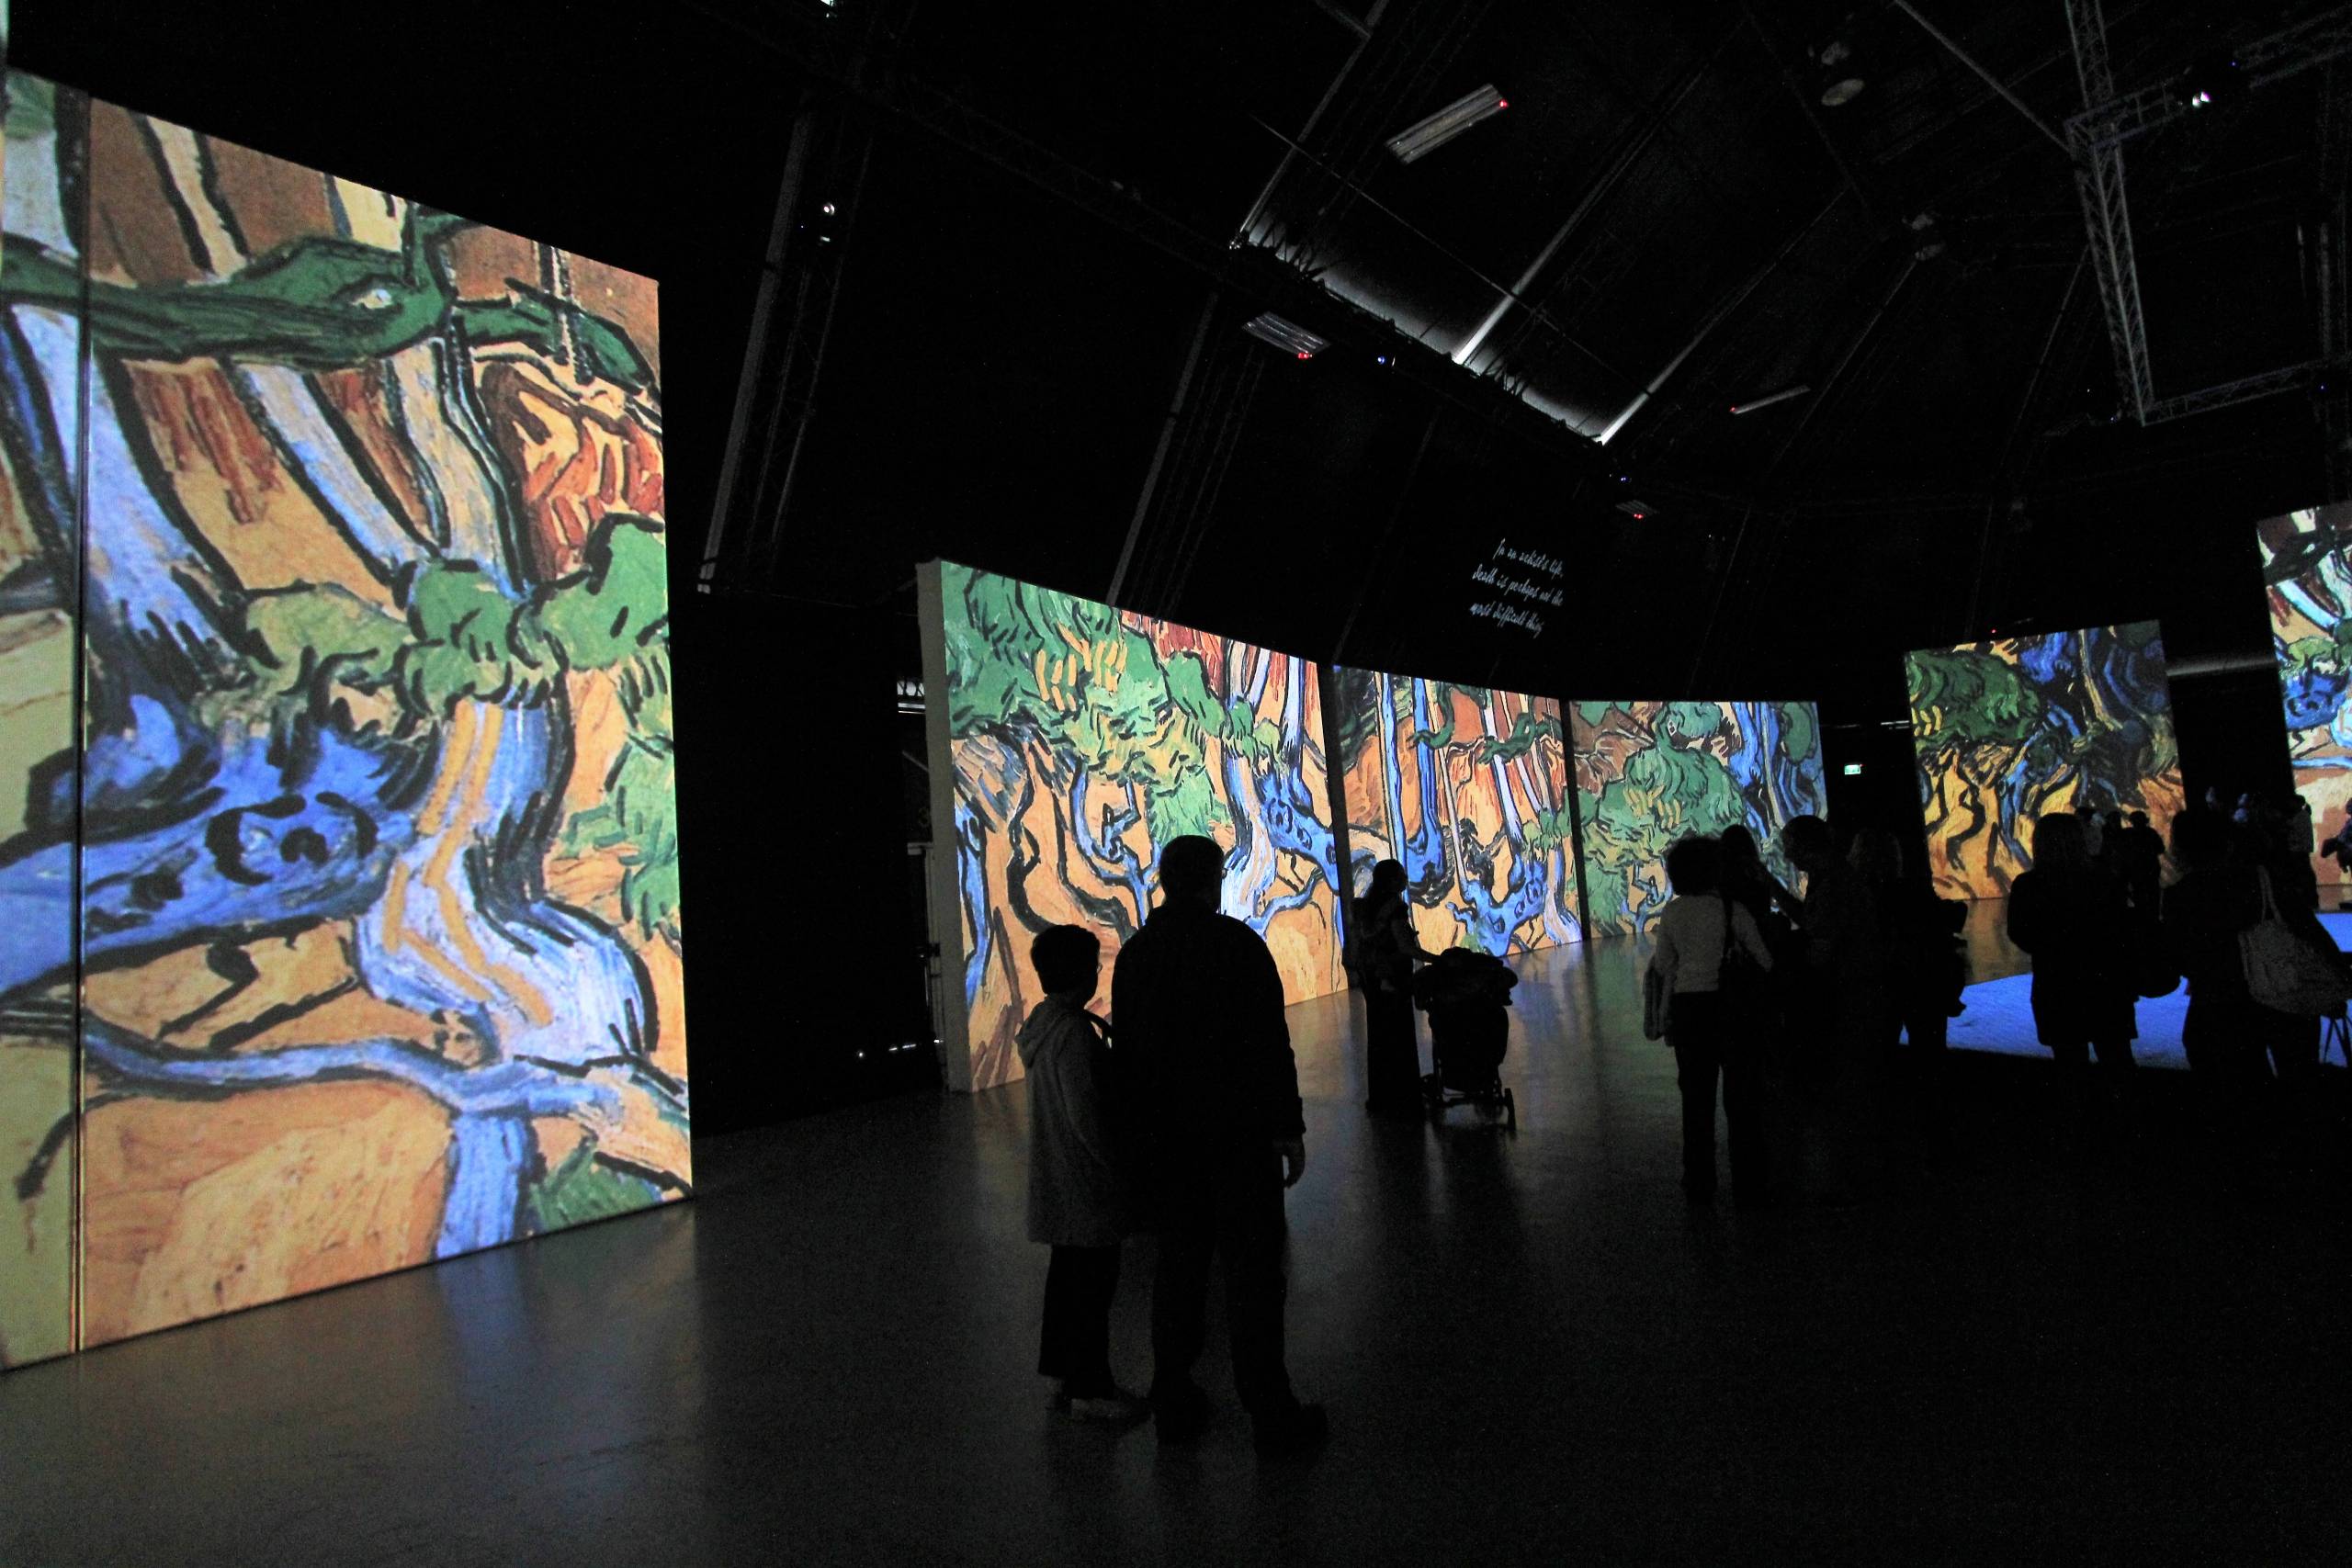 The use of immersive technology in museums is still in its early stages